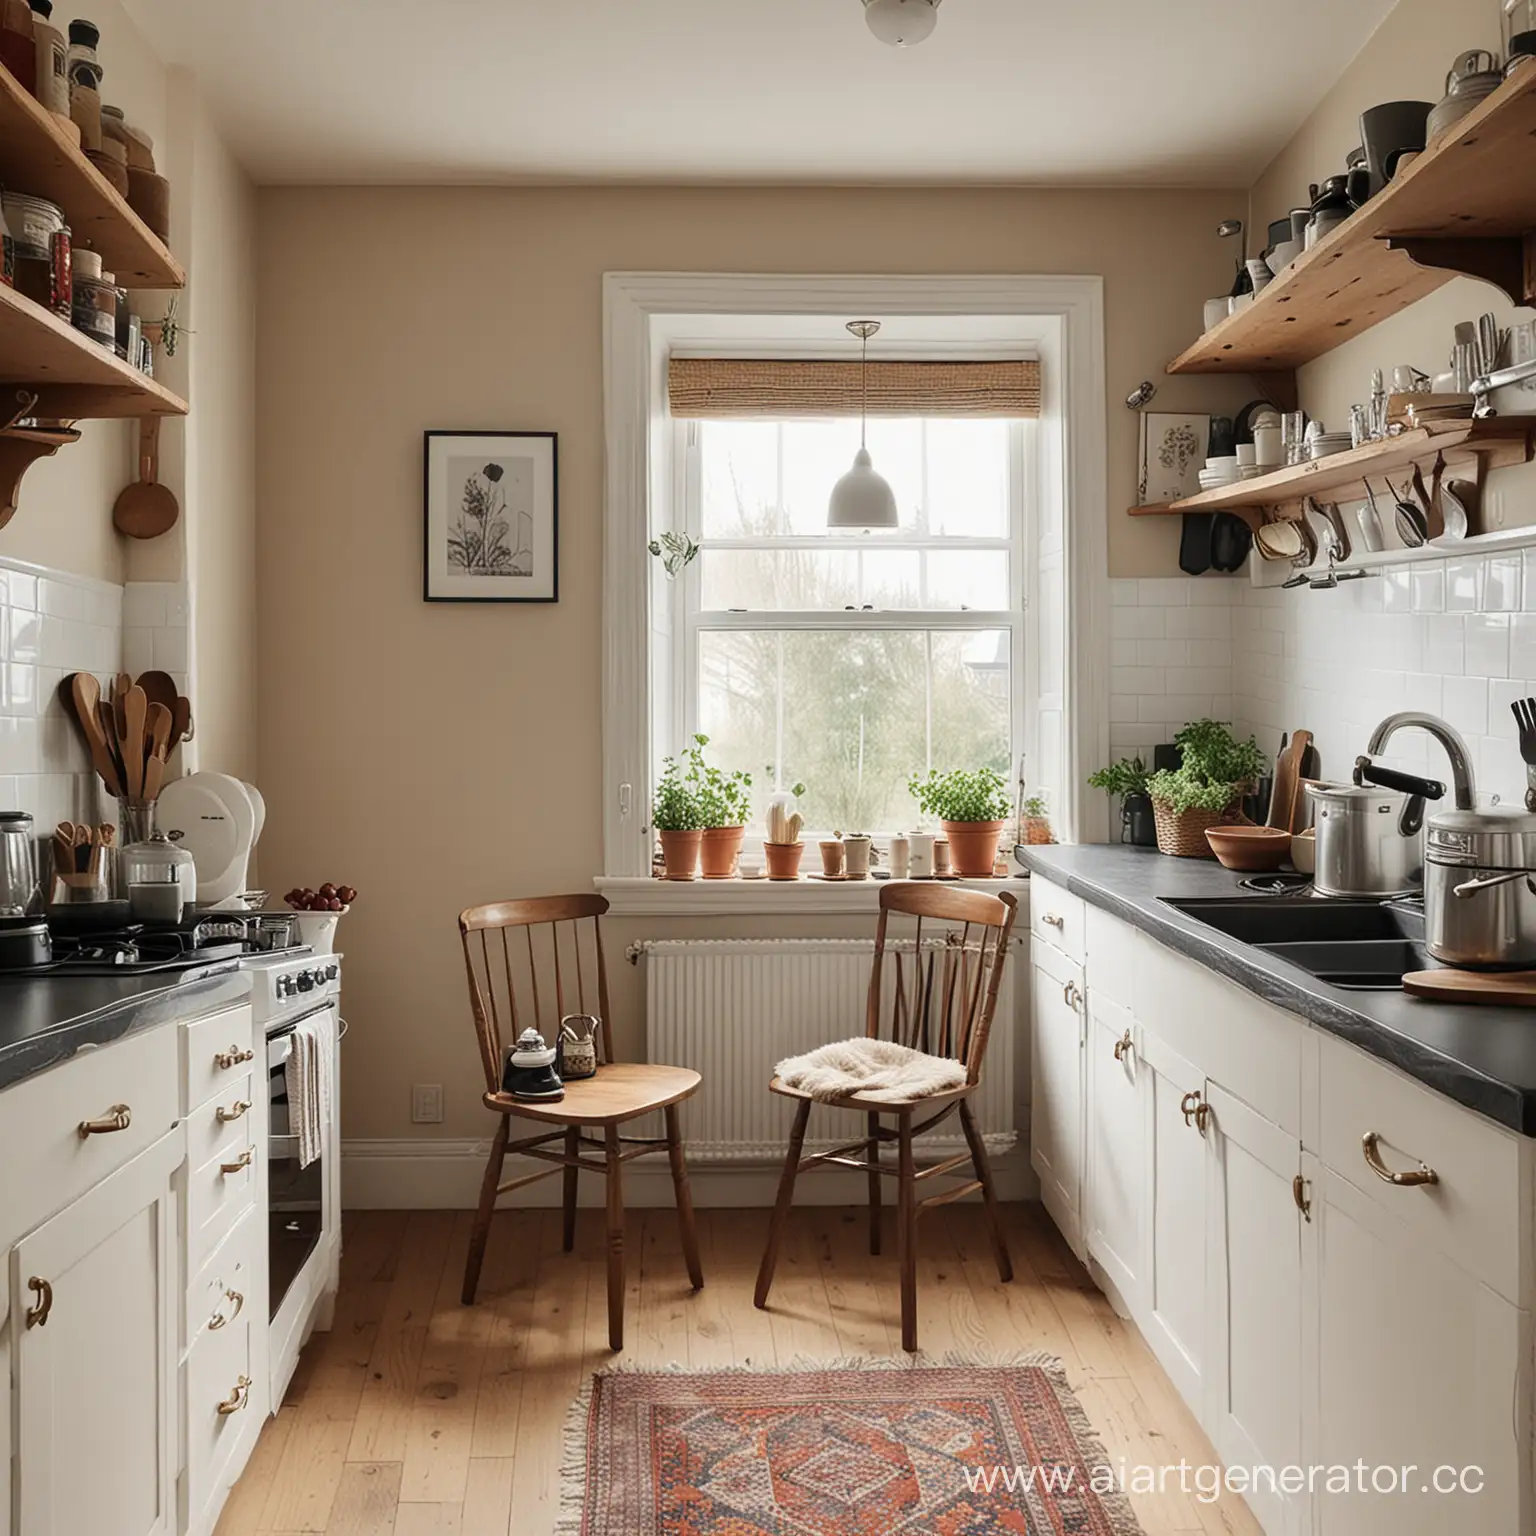 Cozy-Kitchen-Central-Little-Chair-and-Whimsical-Decor